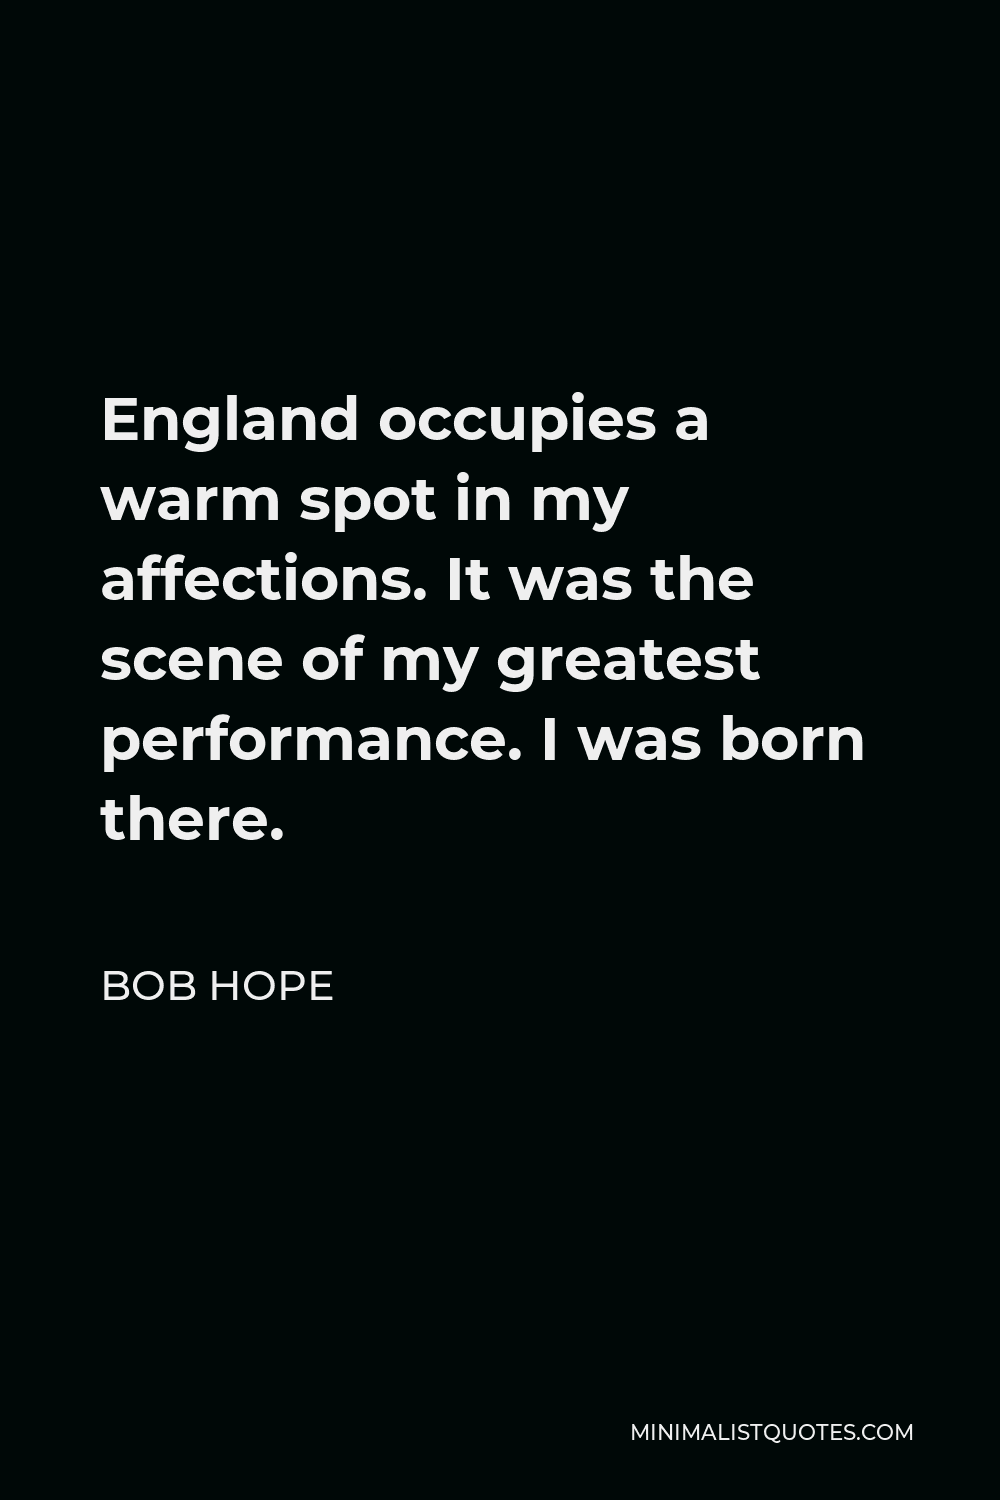 Bob Hope Quote - England occupies a warm spot in my affections. It was the scene of my greatest performance. I was born there.